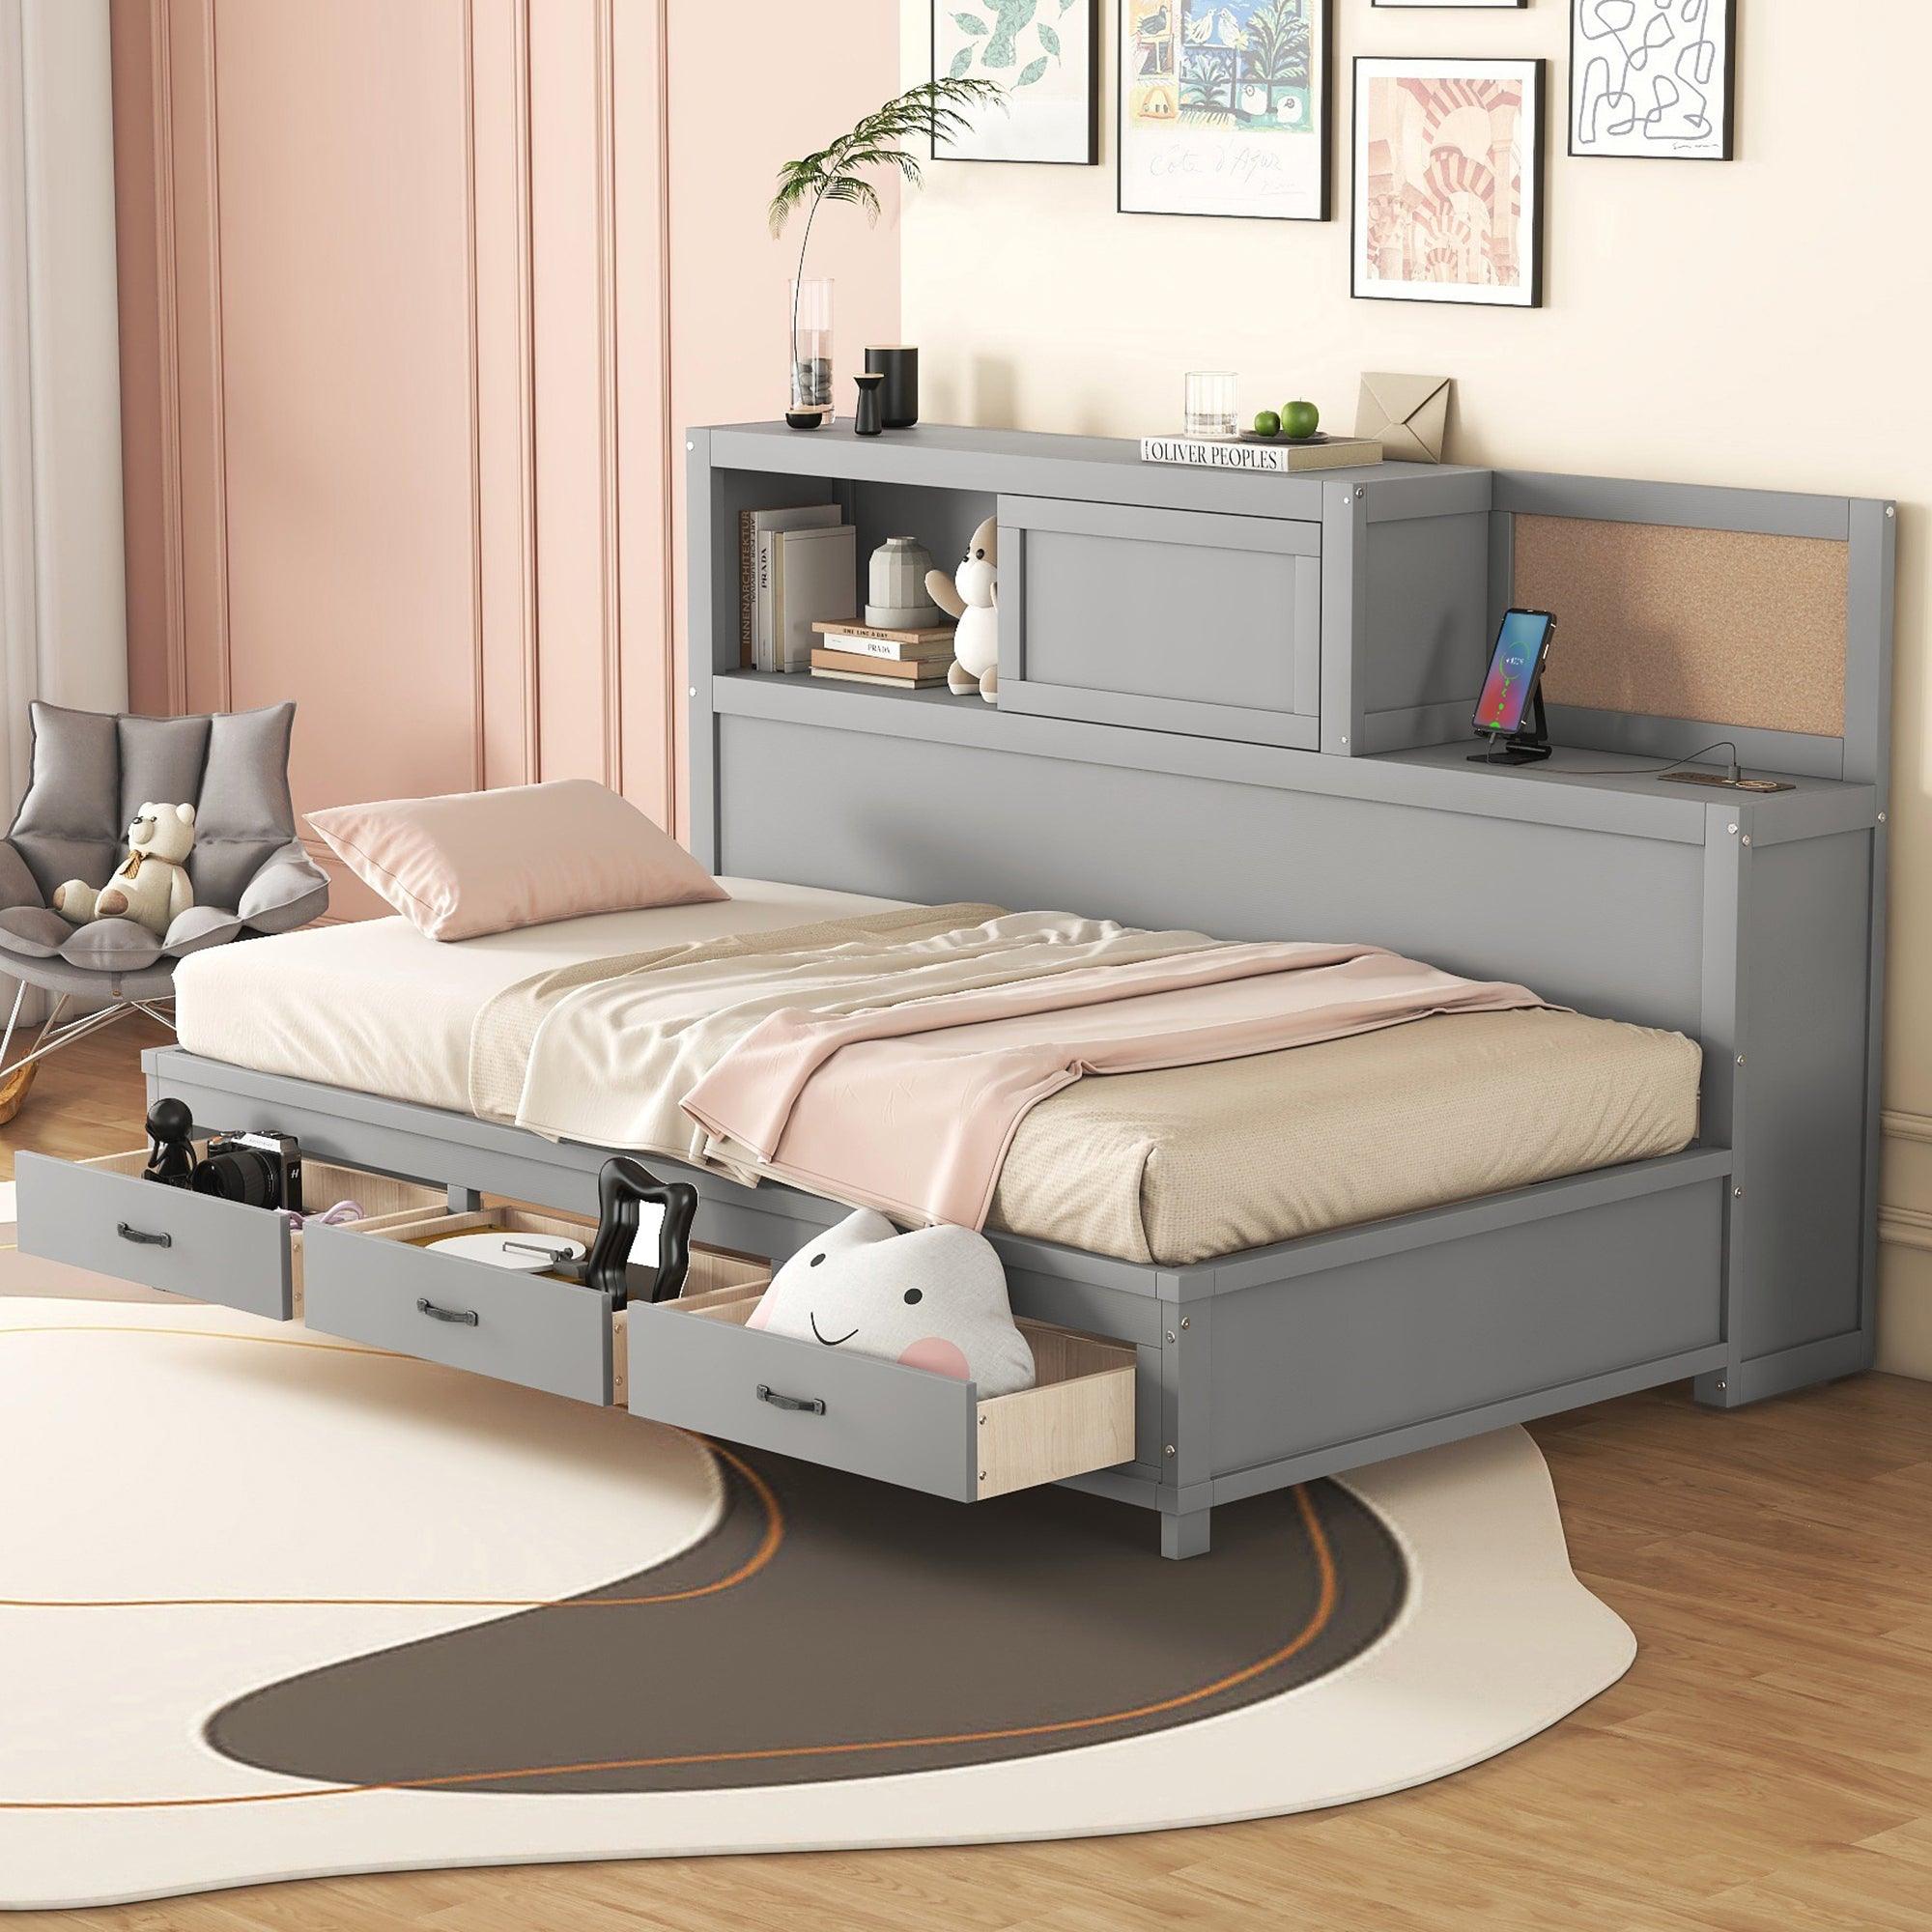 🆓🚛 Twin Size Wooden Daybed With 3 Storage Drawers, Upper Soft Board, Shelf, Set Of Sockets & Usb Ports, Gray